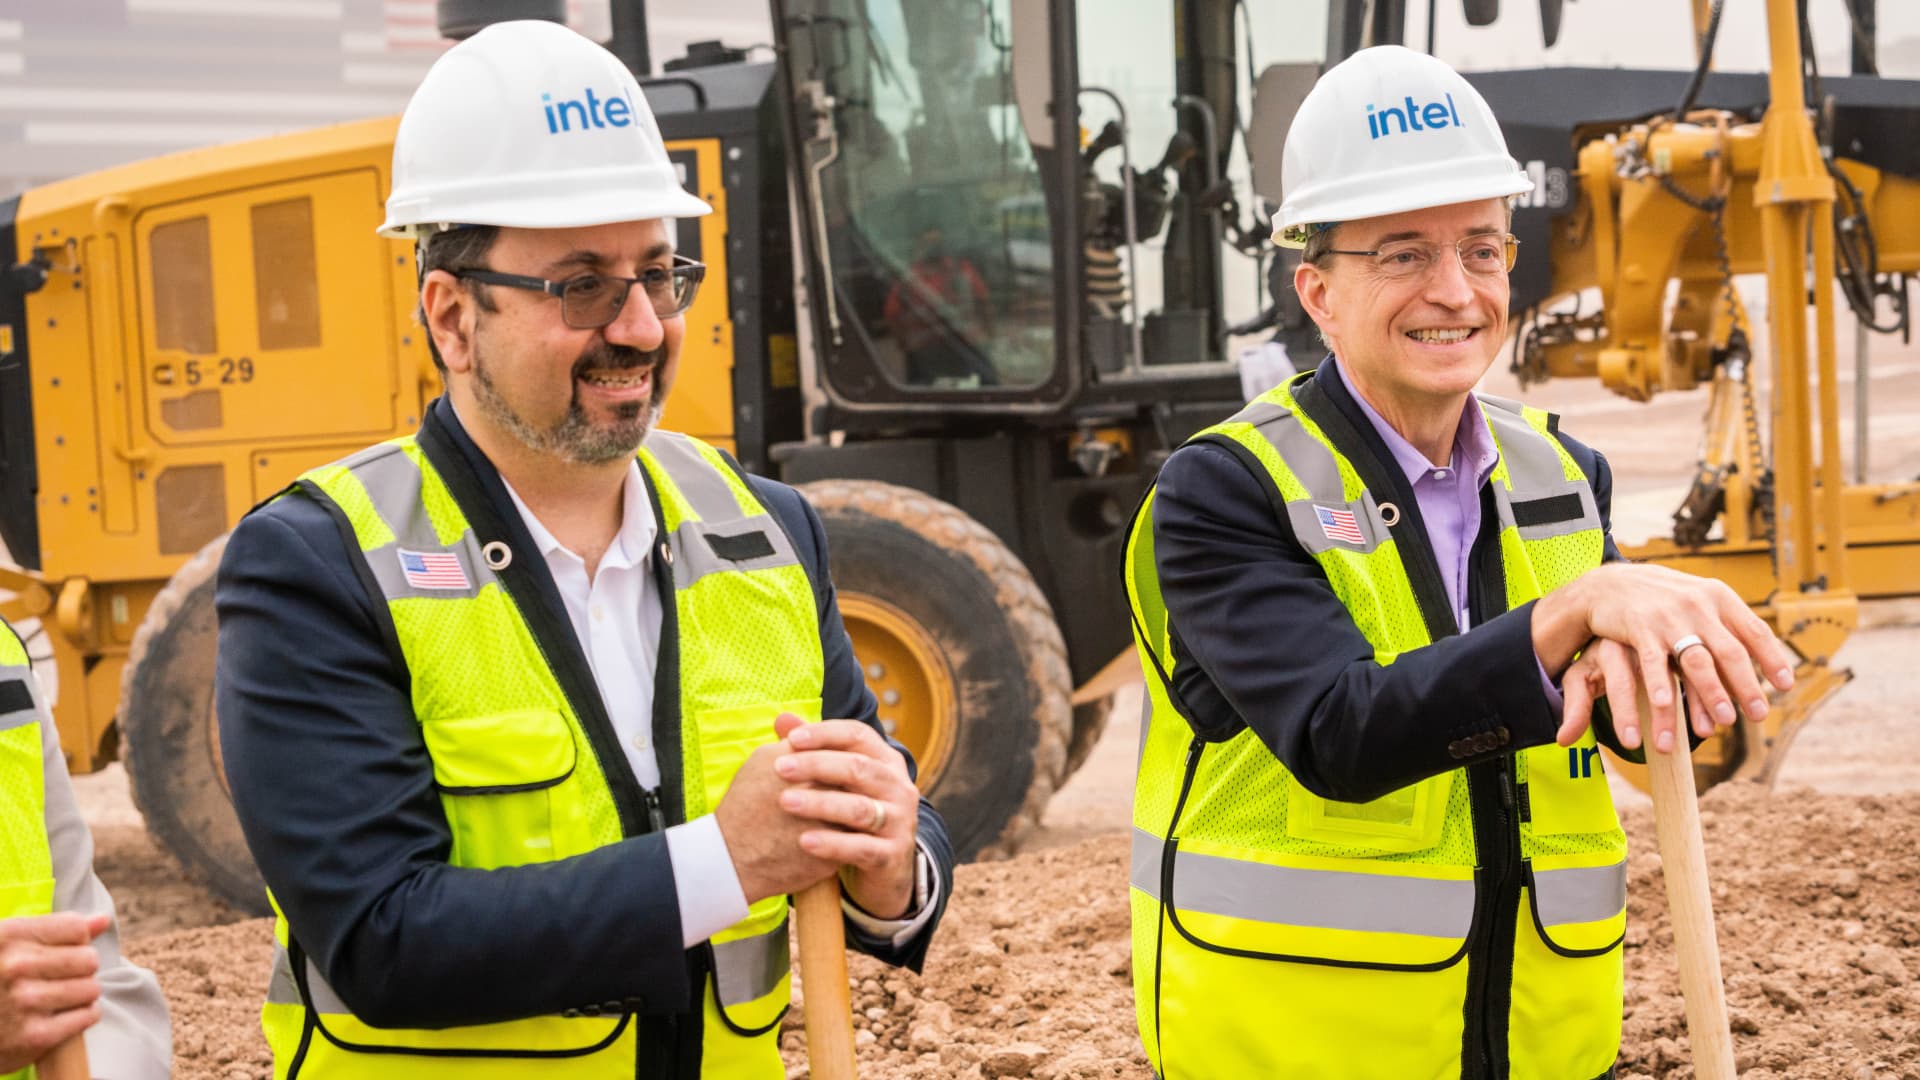 Intel senior vice president Keyvan Esfarjani and Intel CEO Pat Gelsinger at the groundbreaking of two new chip fabrication plants in Chandler, Arizona, on Friday, Sept. 24, 2021.